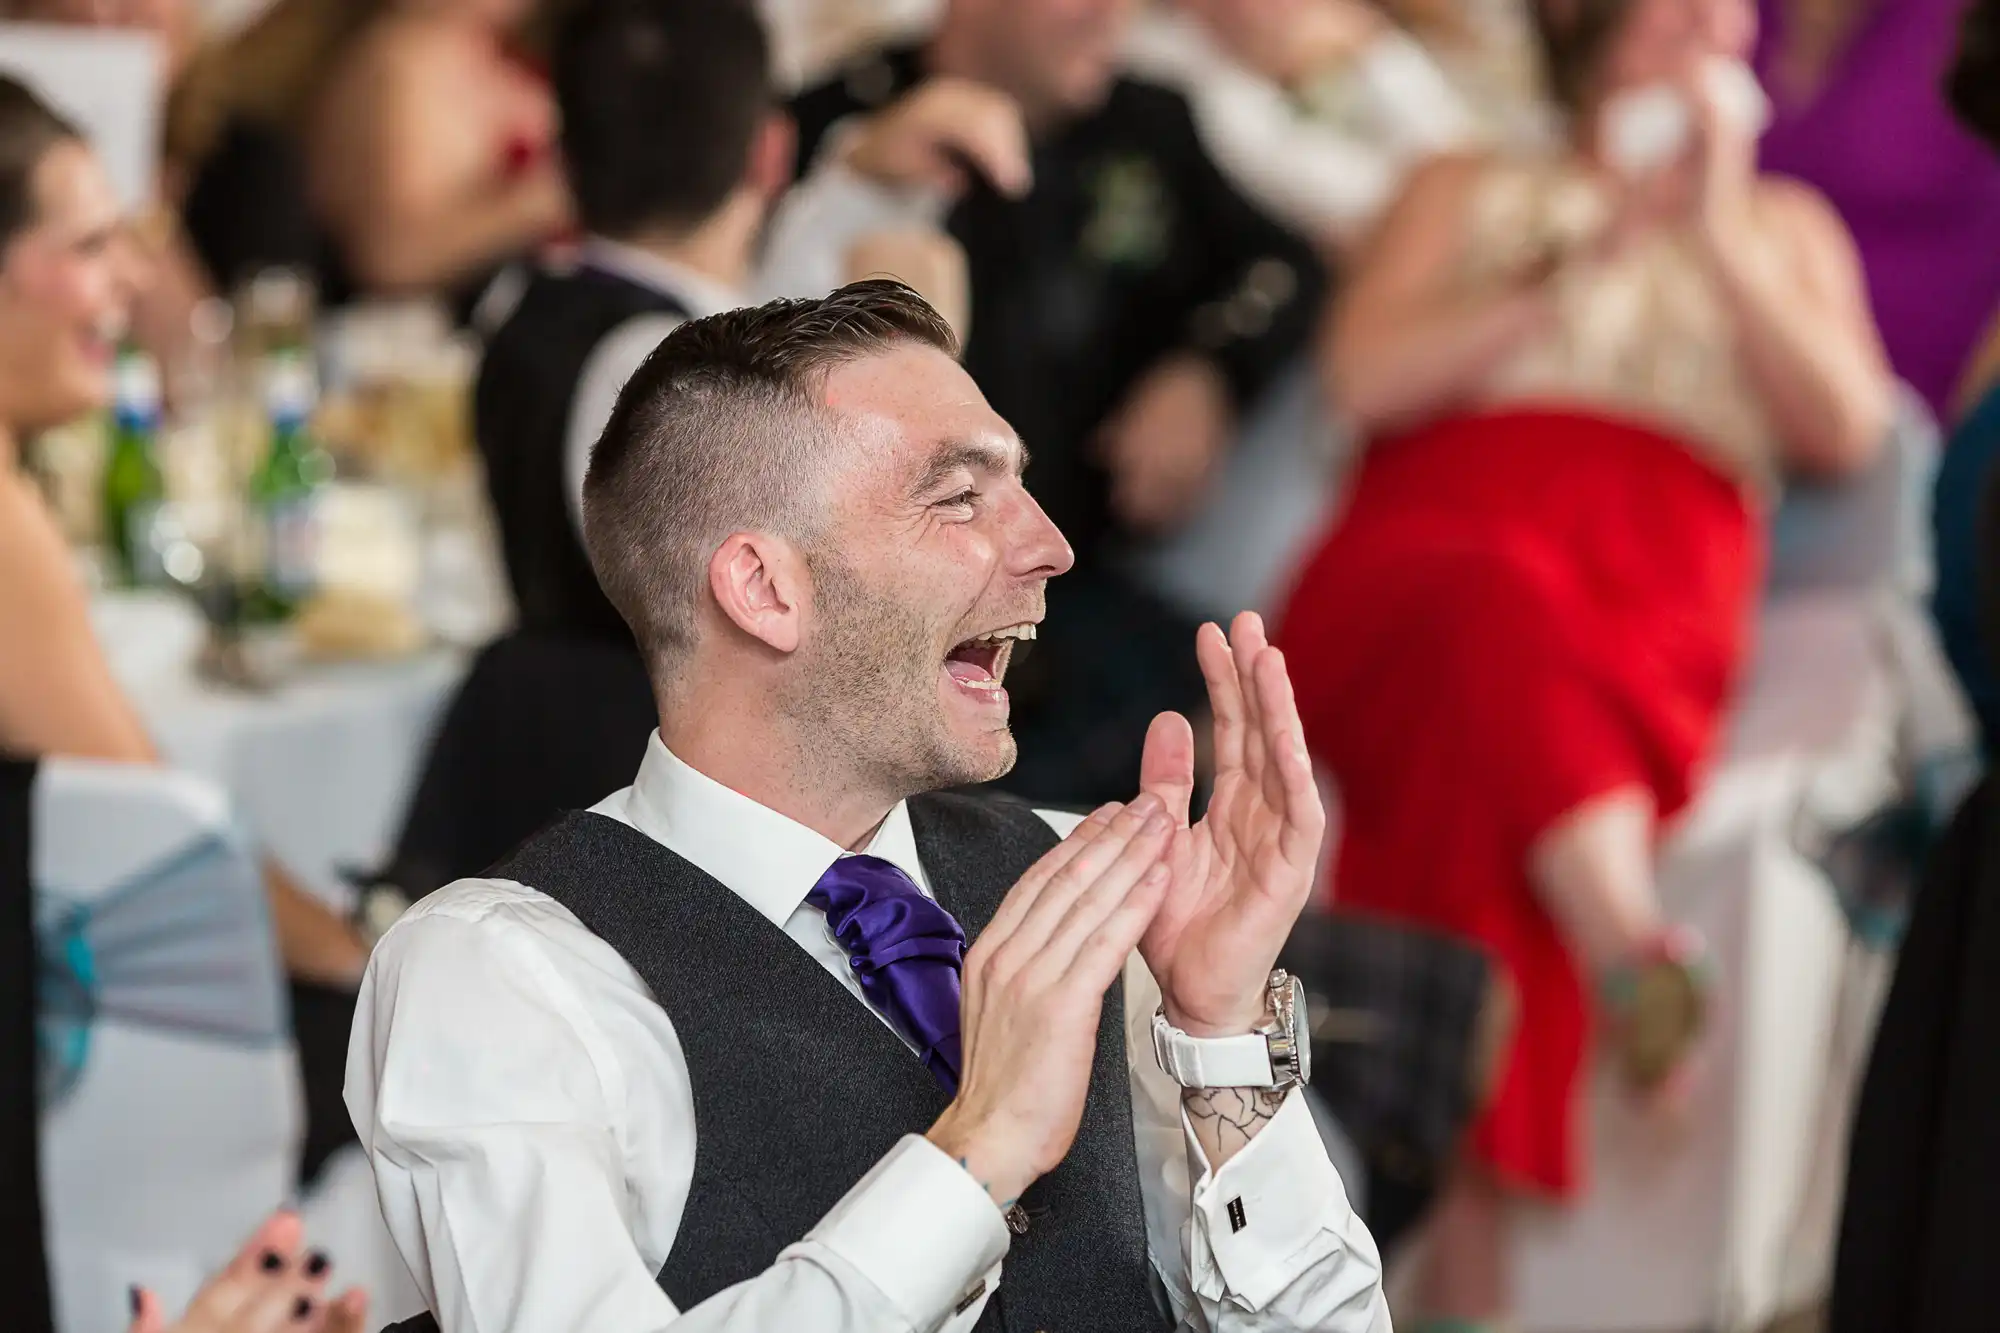 Man in a gray suit and purple tie clapping and laughing at a festive event with blurred guests in the background.